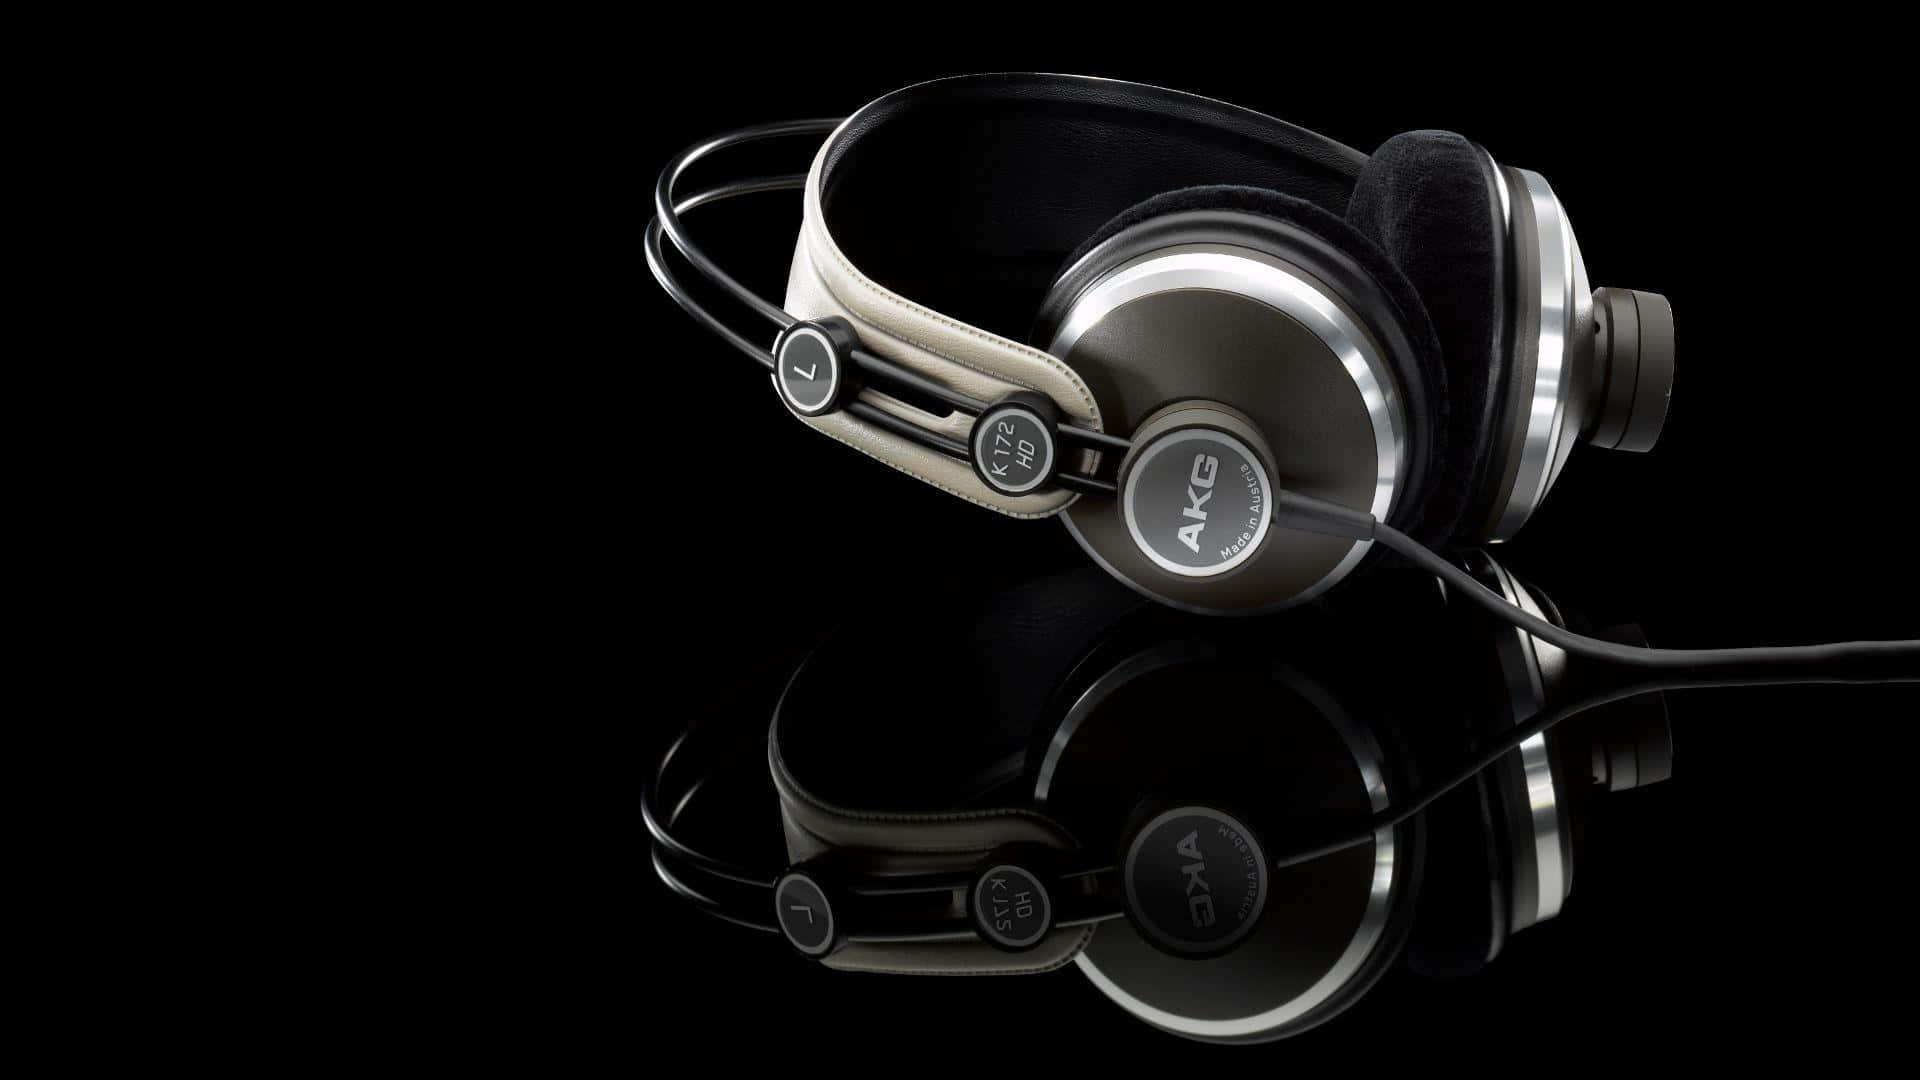 A Pair Of Headphones On A Black Background